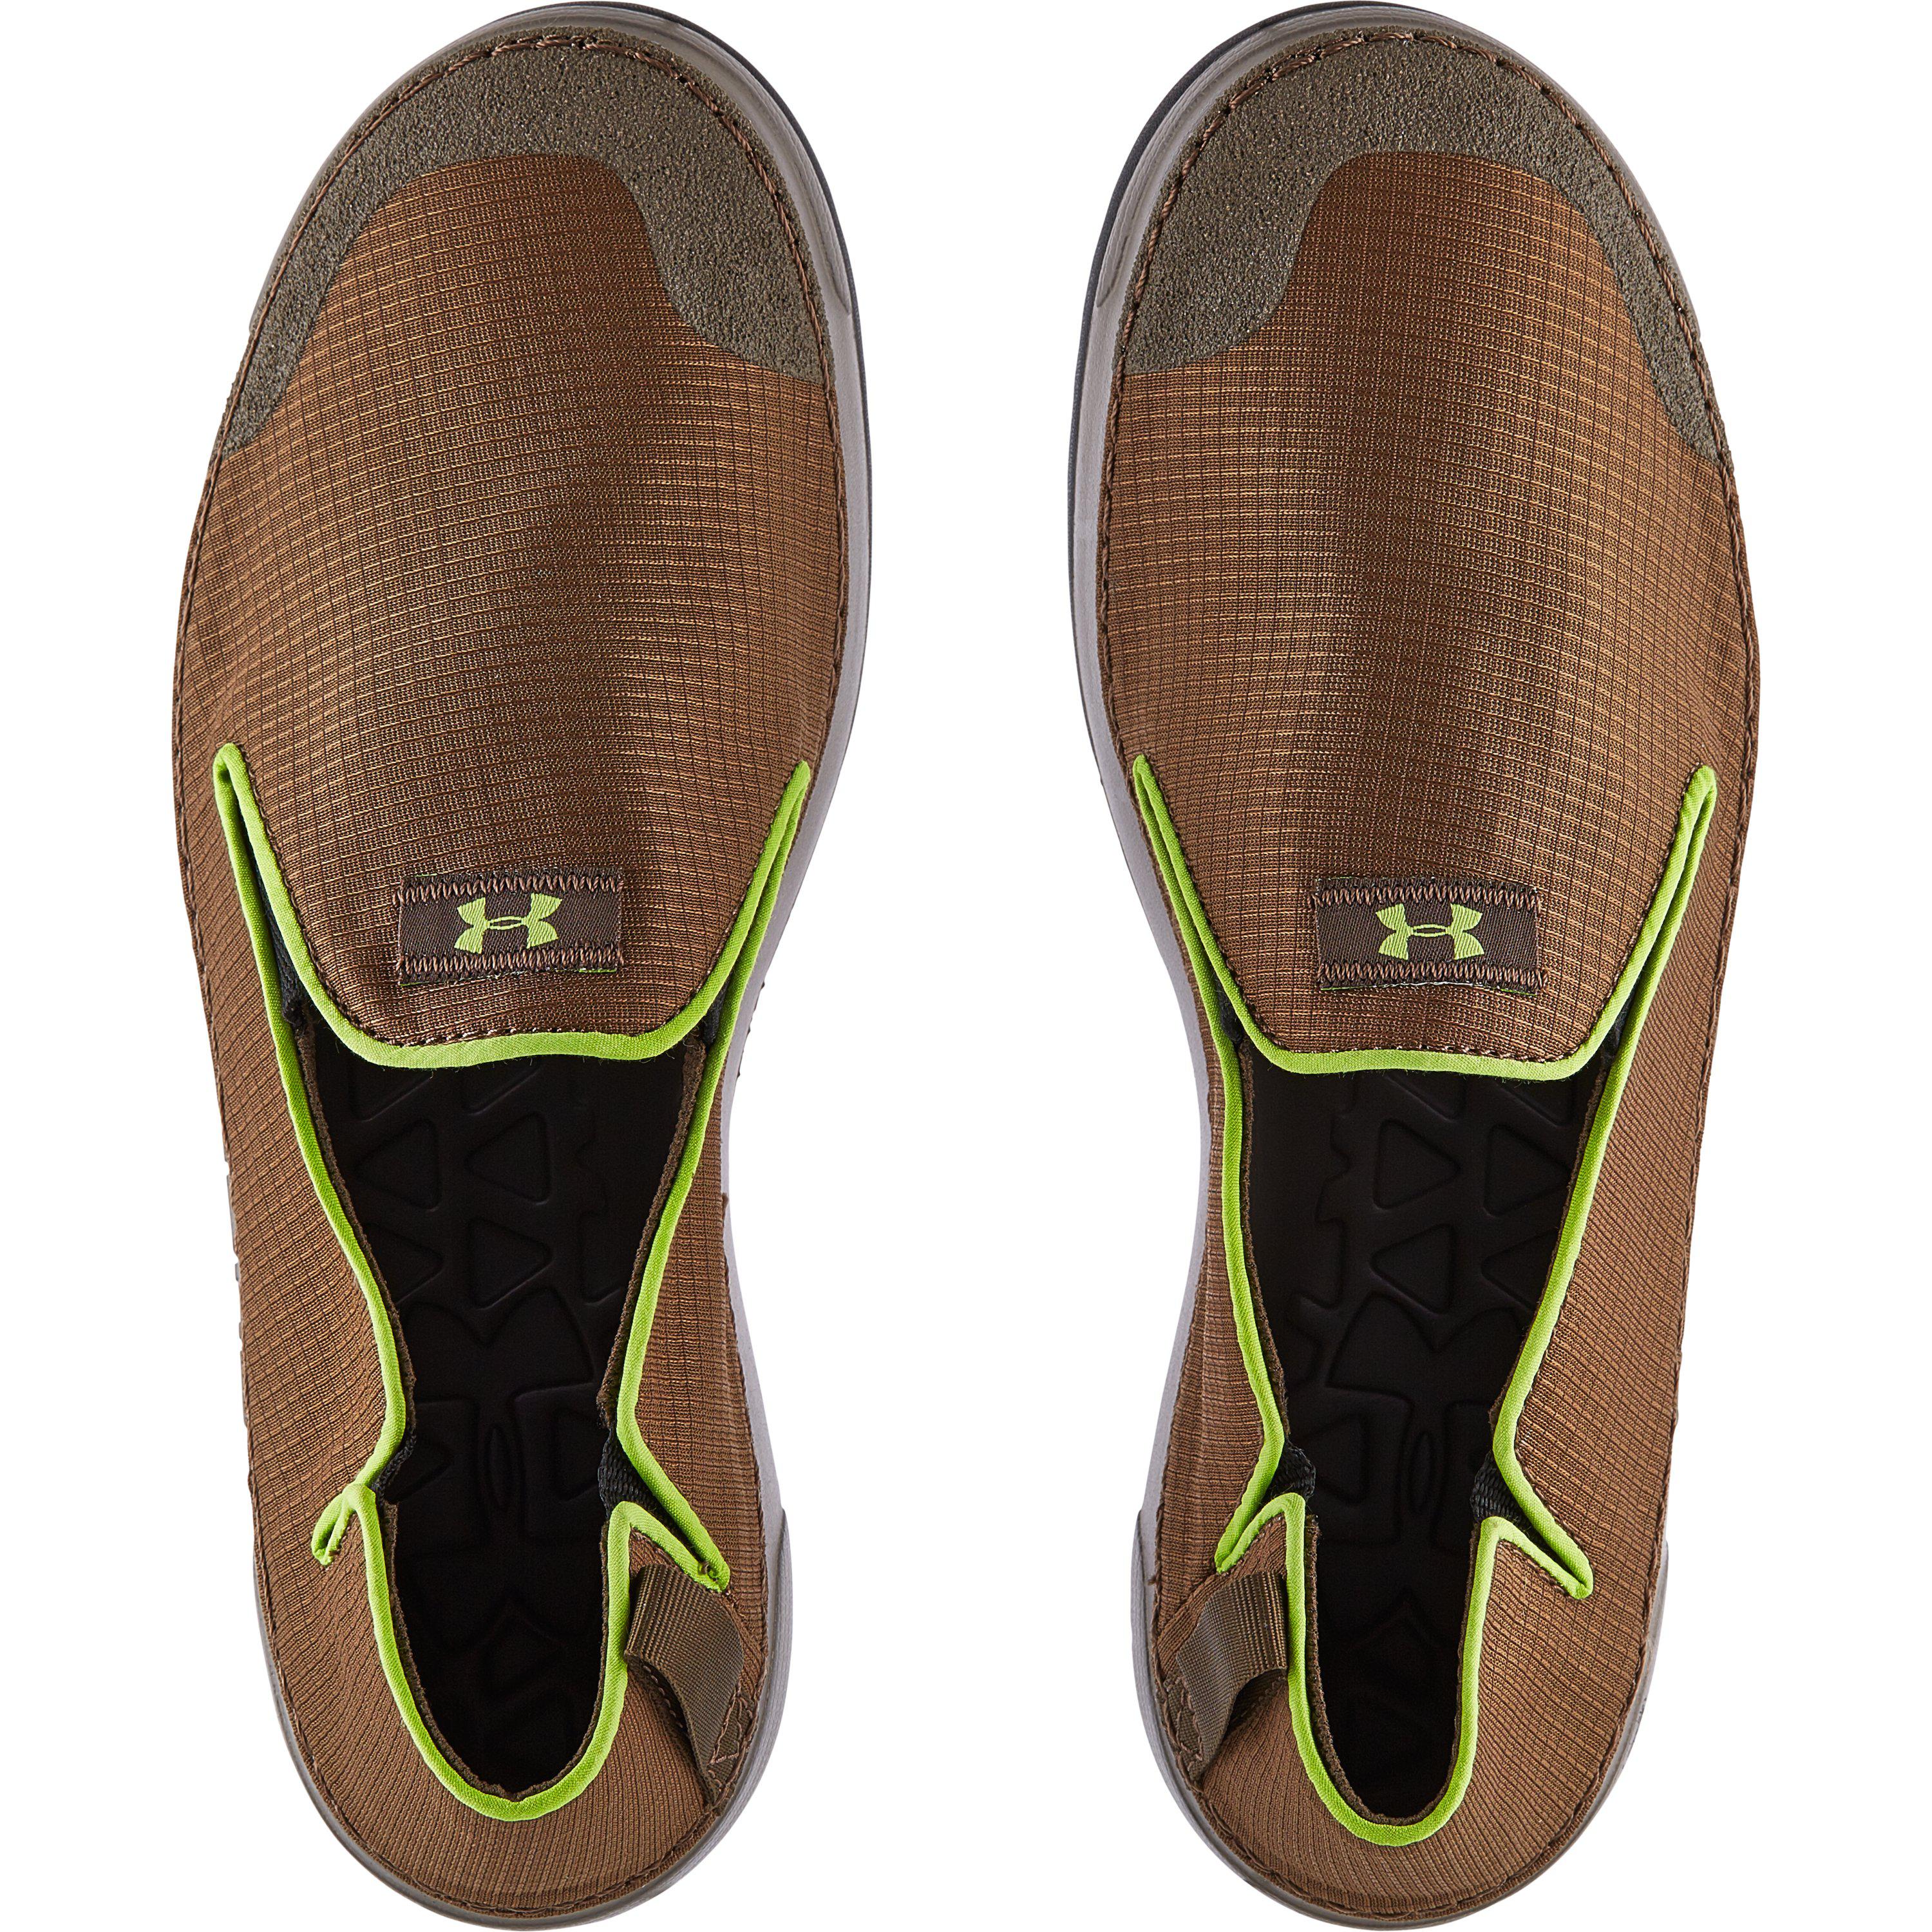 Under Armour Rubber Men's Ua Spike Camp Shoes in Brown for